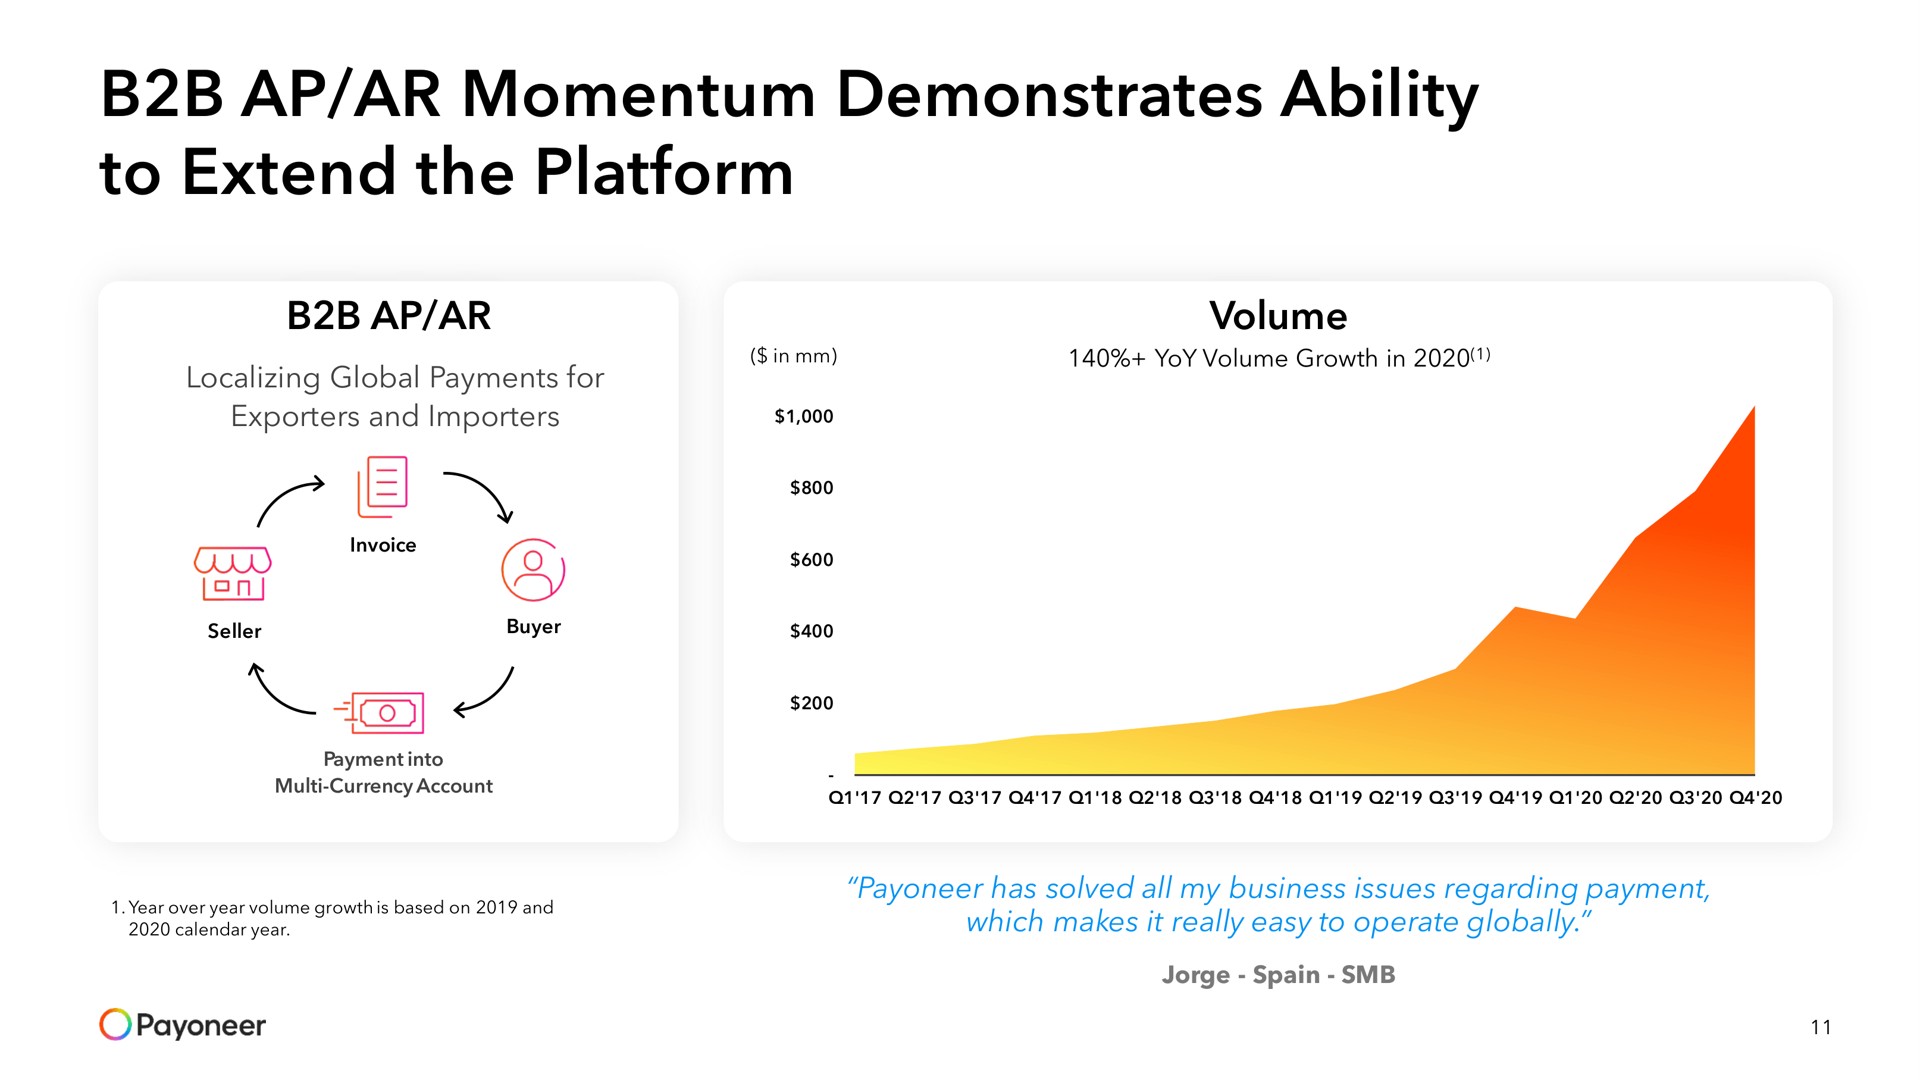 momentum demonstrates ability to extend the platform volume | Payoneer